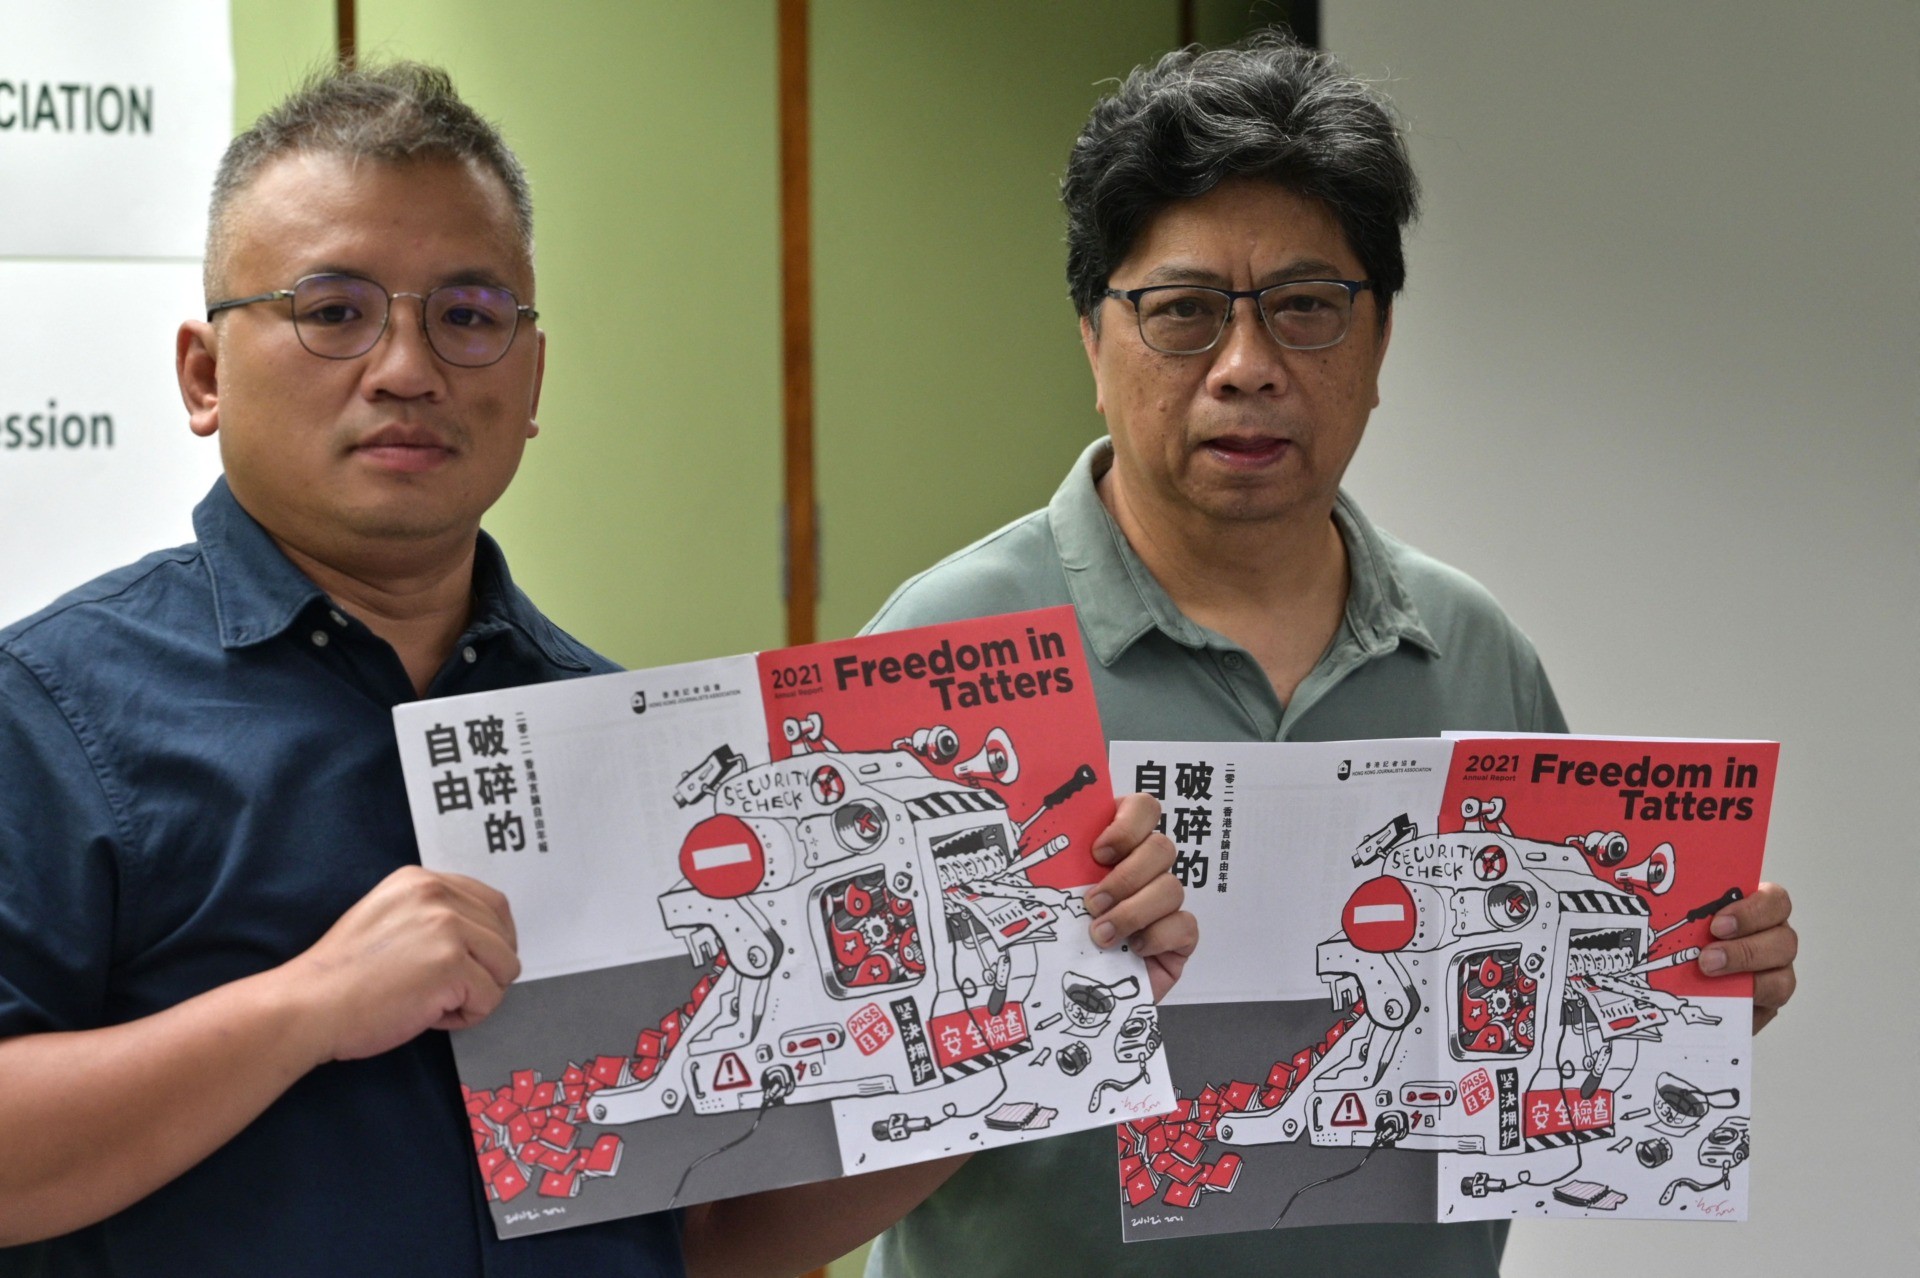 Chairperson of the Hong Kong Journalists Association (HKJA) Ronson Chan (L) and Chris Yeung, chief editor of the annual report, pose during a press conference for the release of the organisations annual report Freedom in Tatters in Hong Kong on July 15, 2021. (Photo by Anthony WALLACE / AFP) (Photo by ANTHONY WALLACE/AFP via Getty Images)